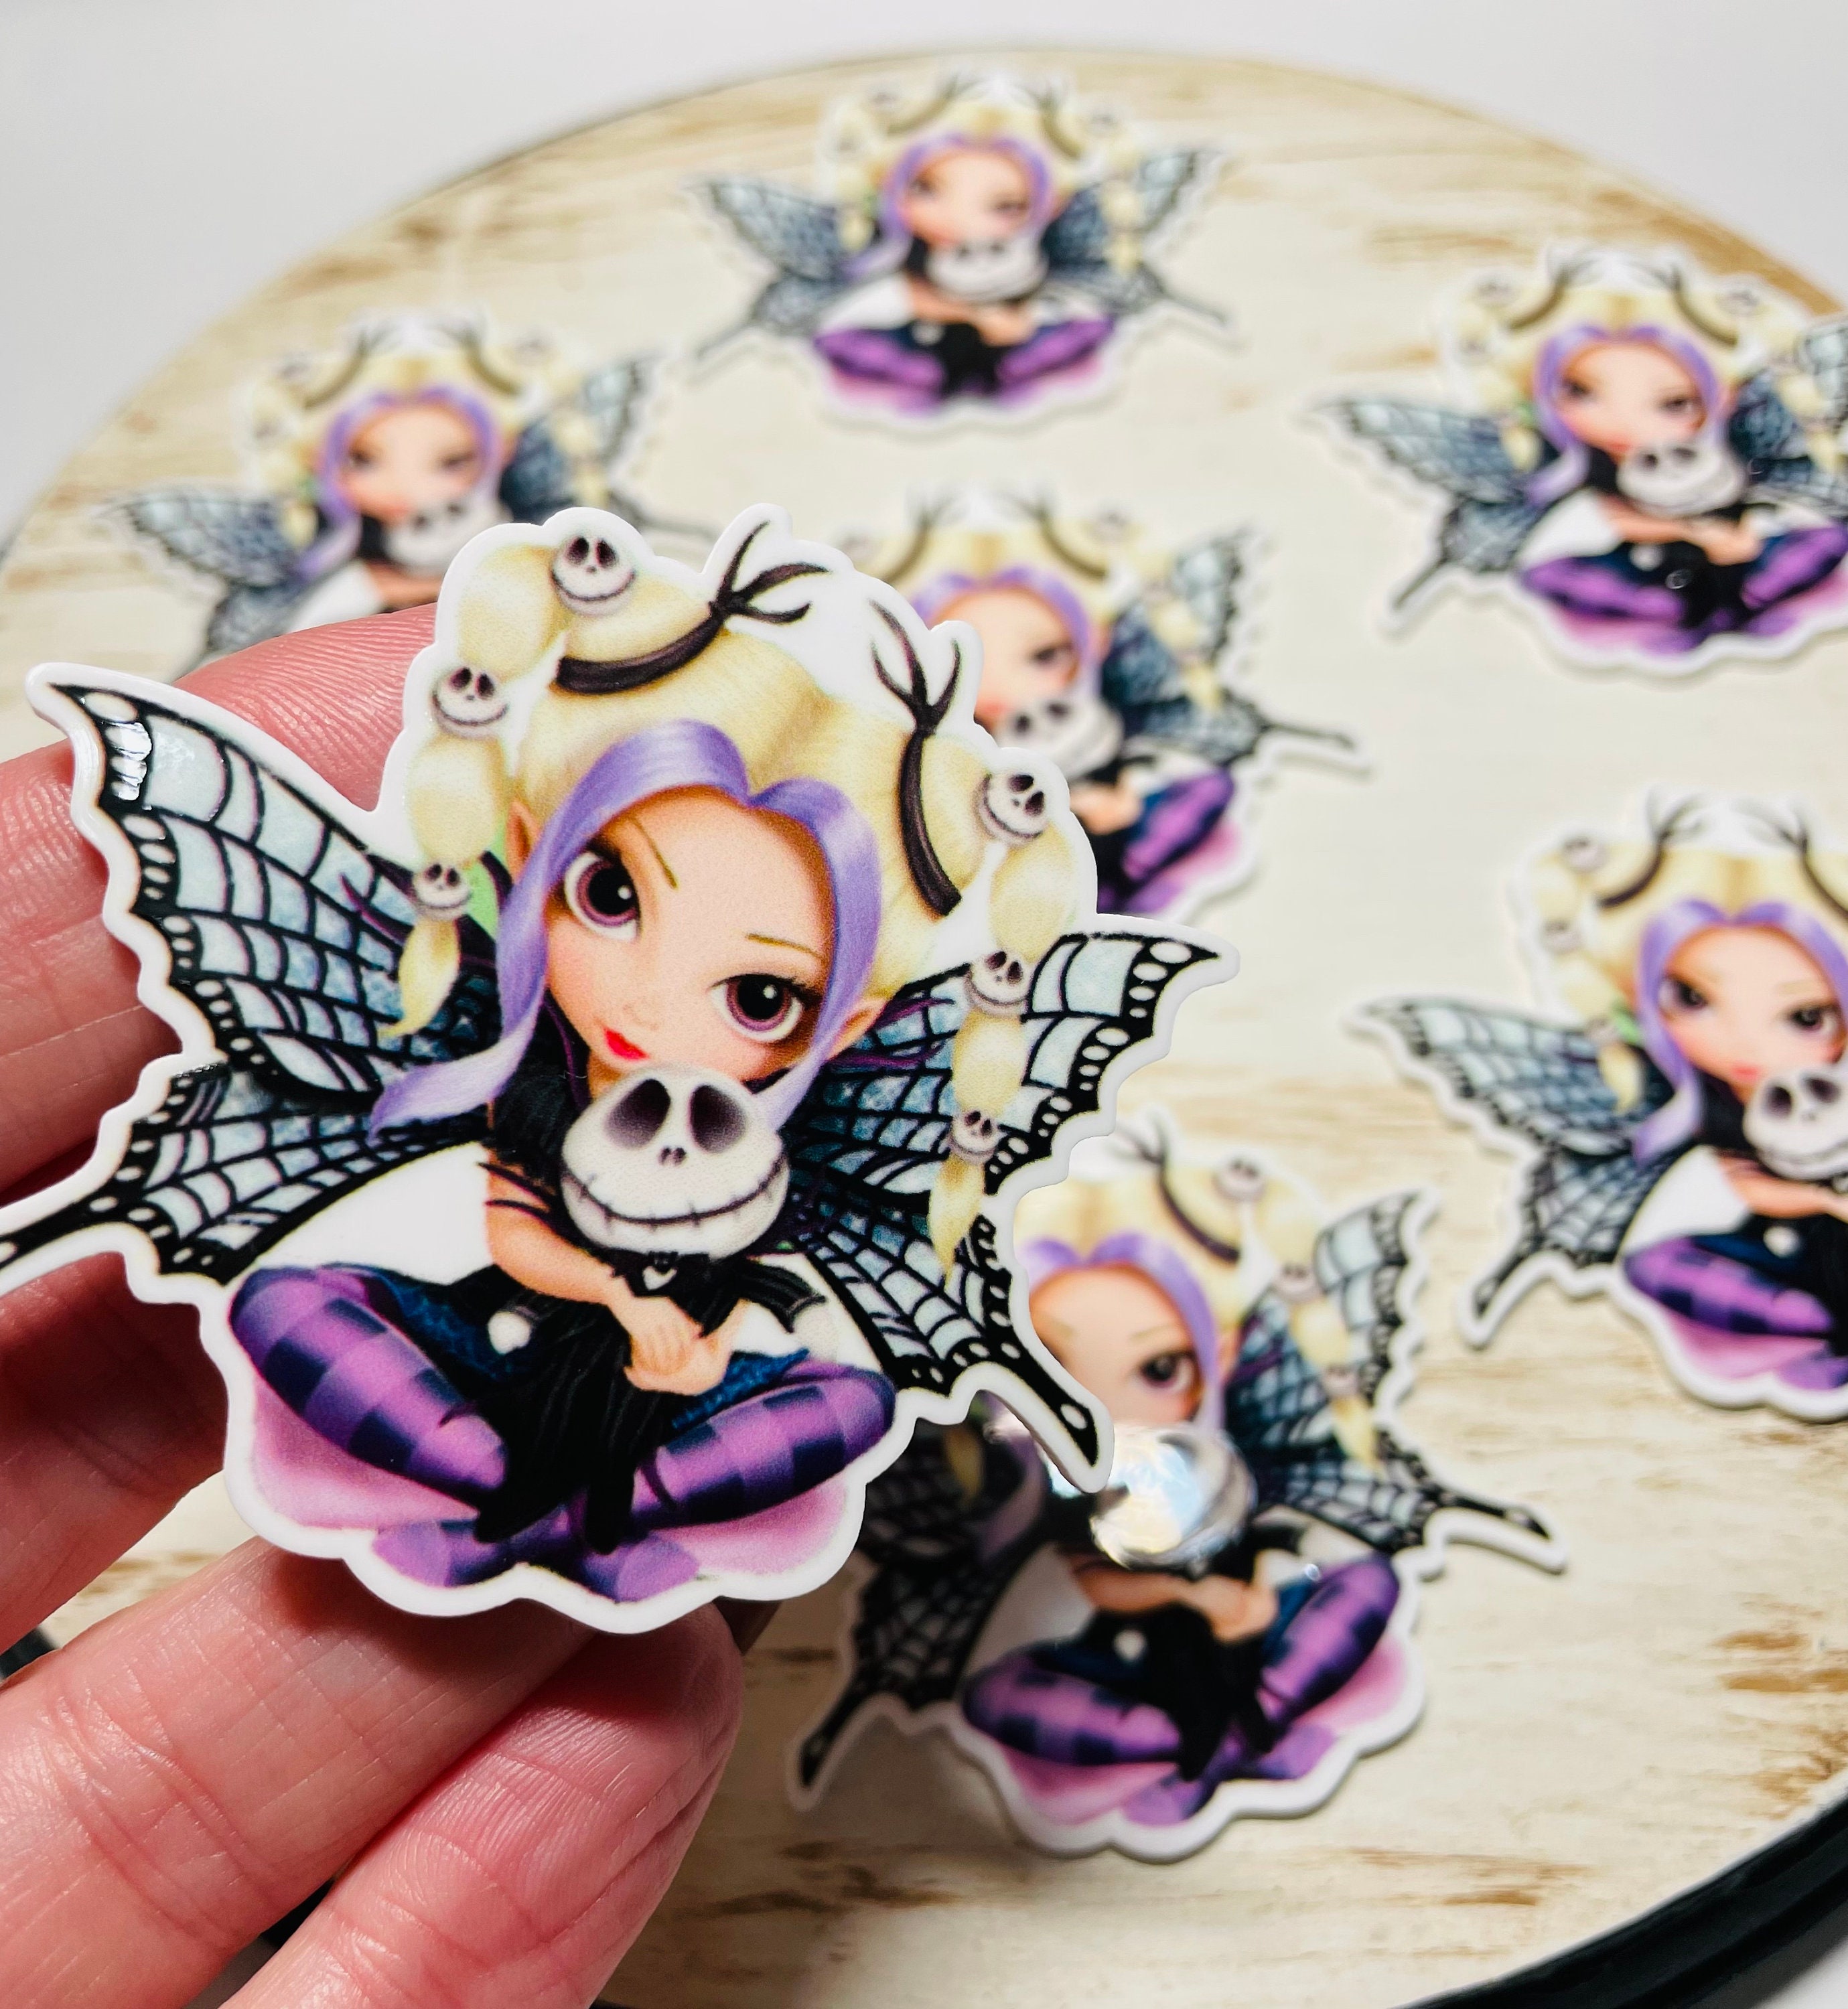 NIGHTMARE FAIRY~ Jack Skellington~ ~Diamond Painting CoVER MINDeR!  ~Coverminder~ Needle Minder~ Refrigerator Magnet~ Assembled in the uSA